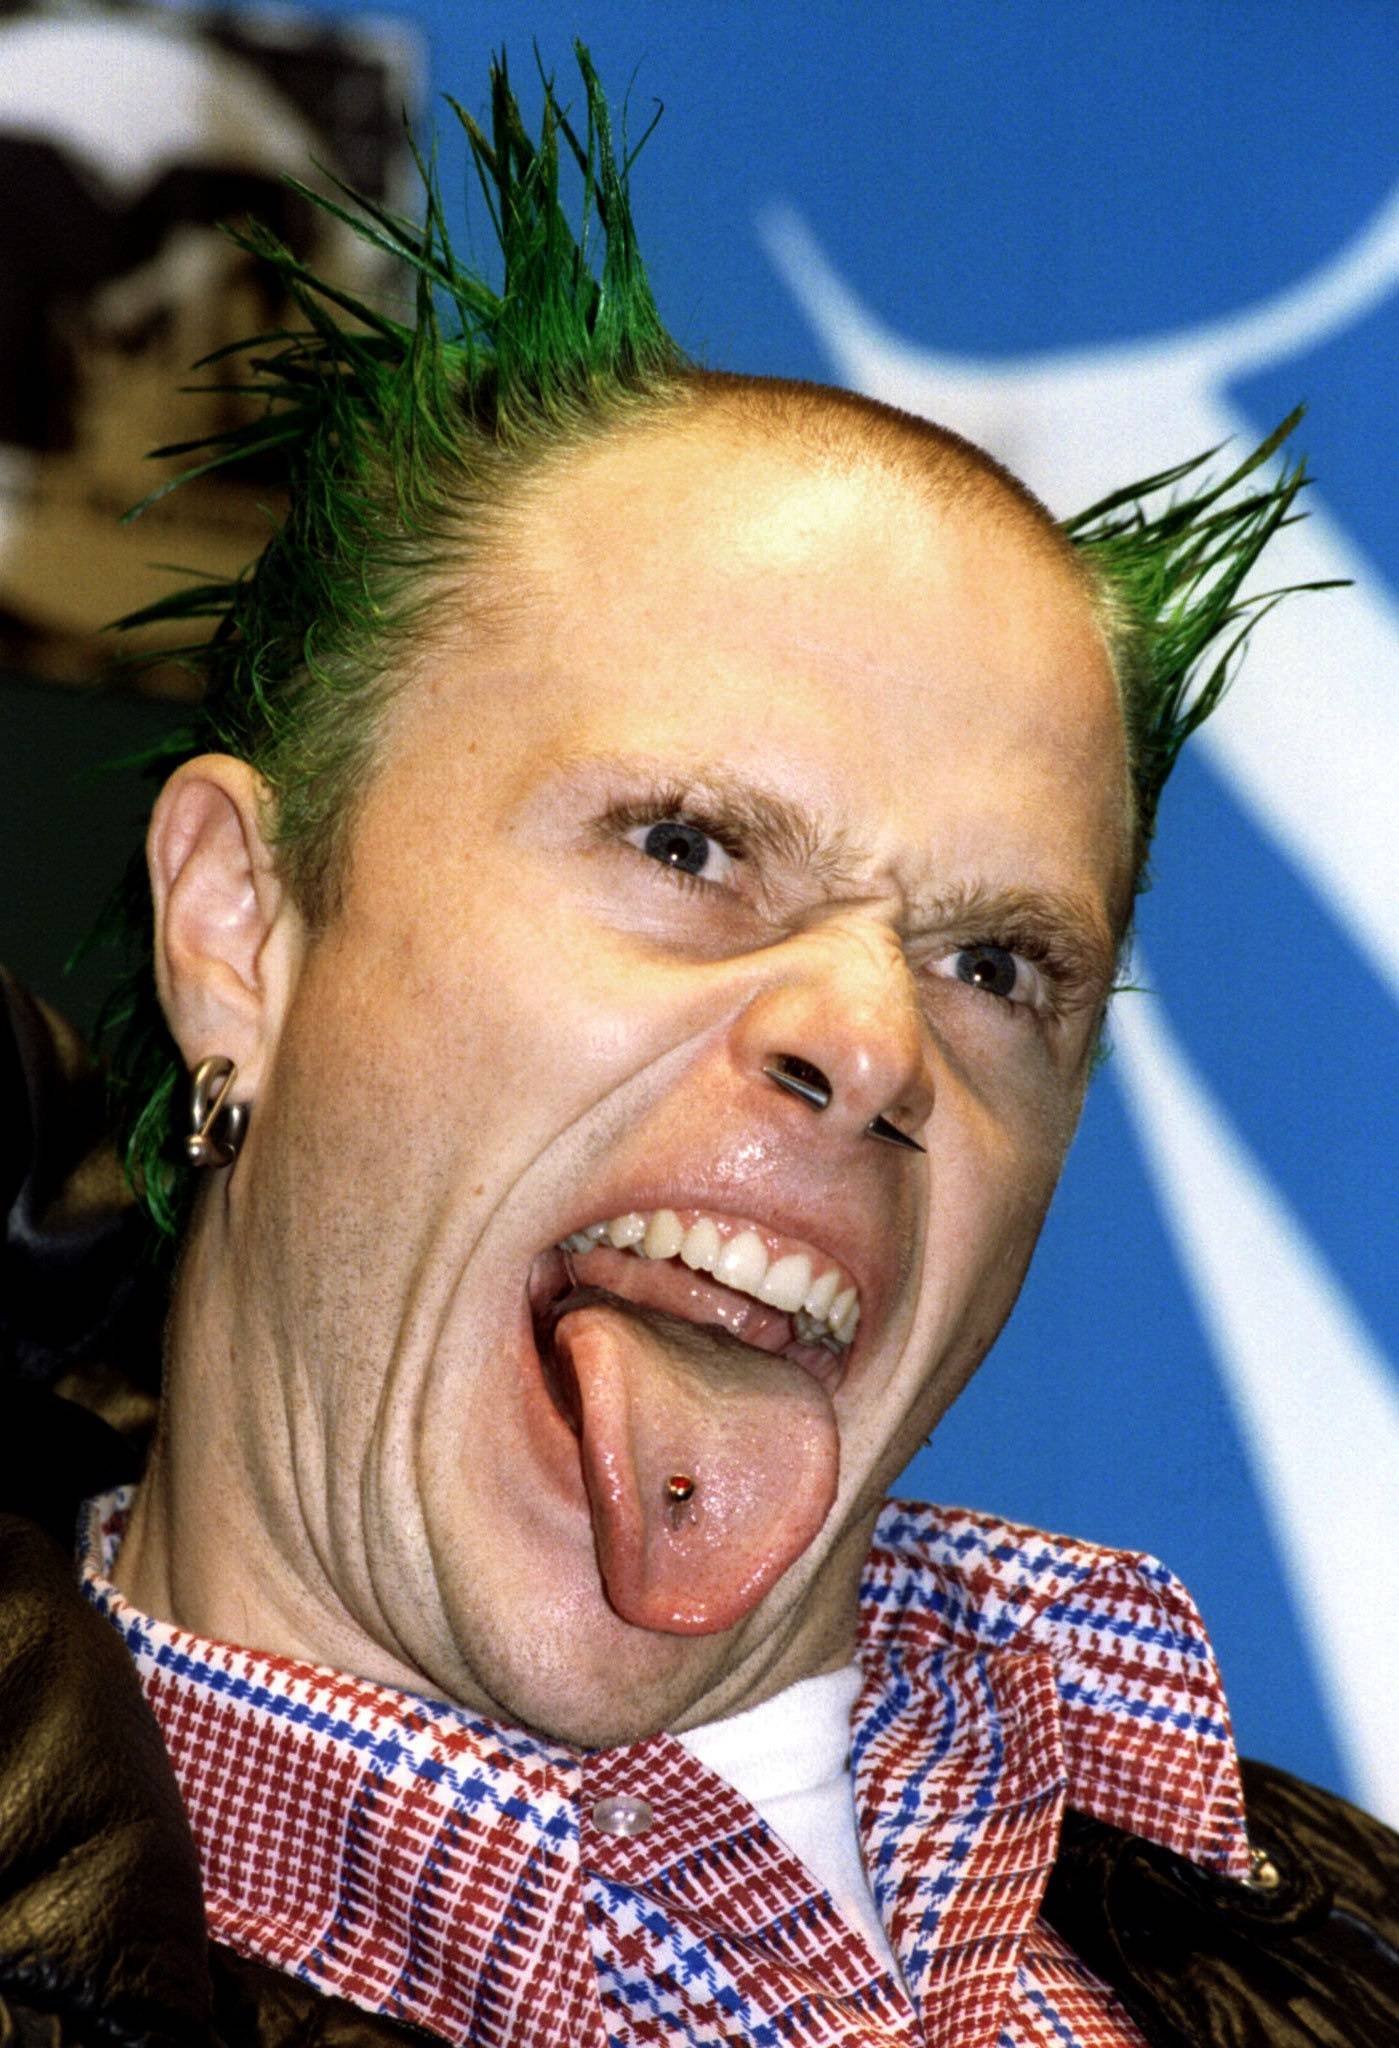 FILE PHOTO: The Prodigy lead singer Keith Flint sticks out his tongue at press photographers during the 1996 MTV Europe Music Awards gala in London